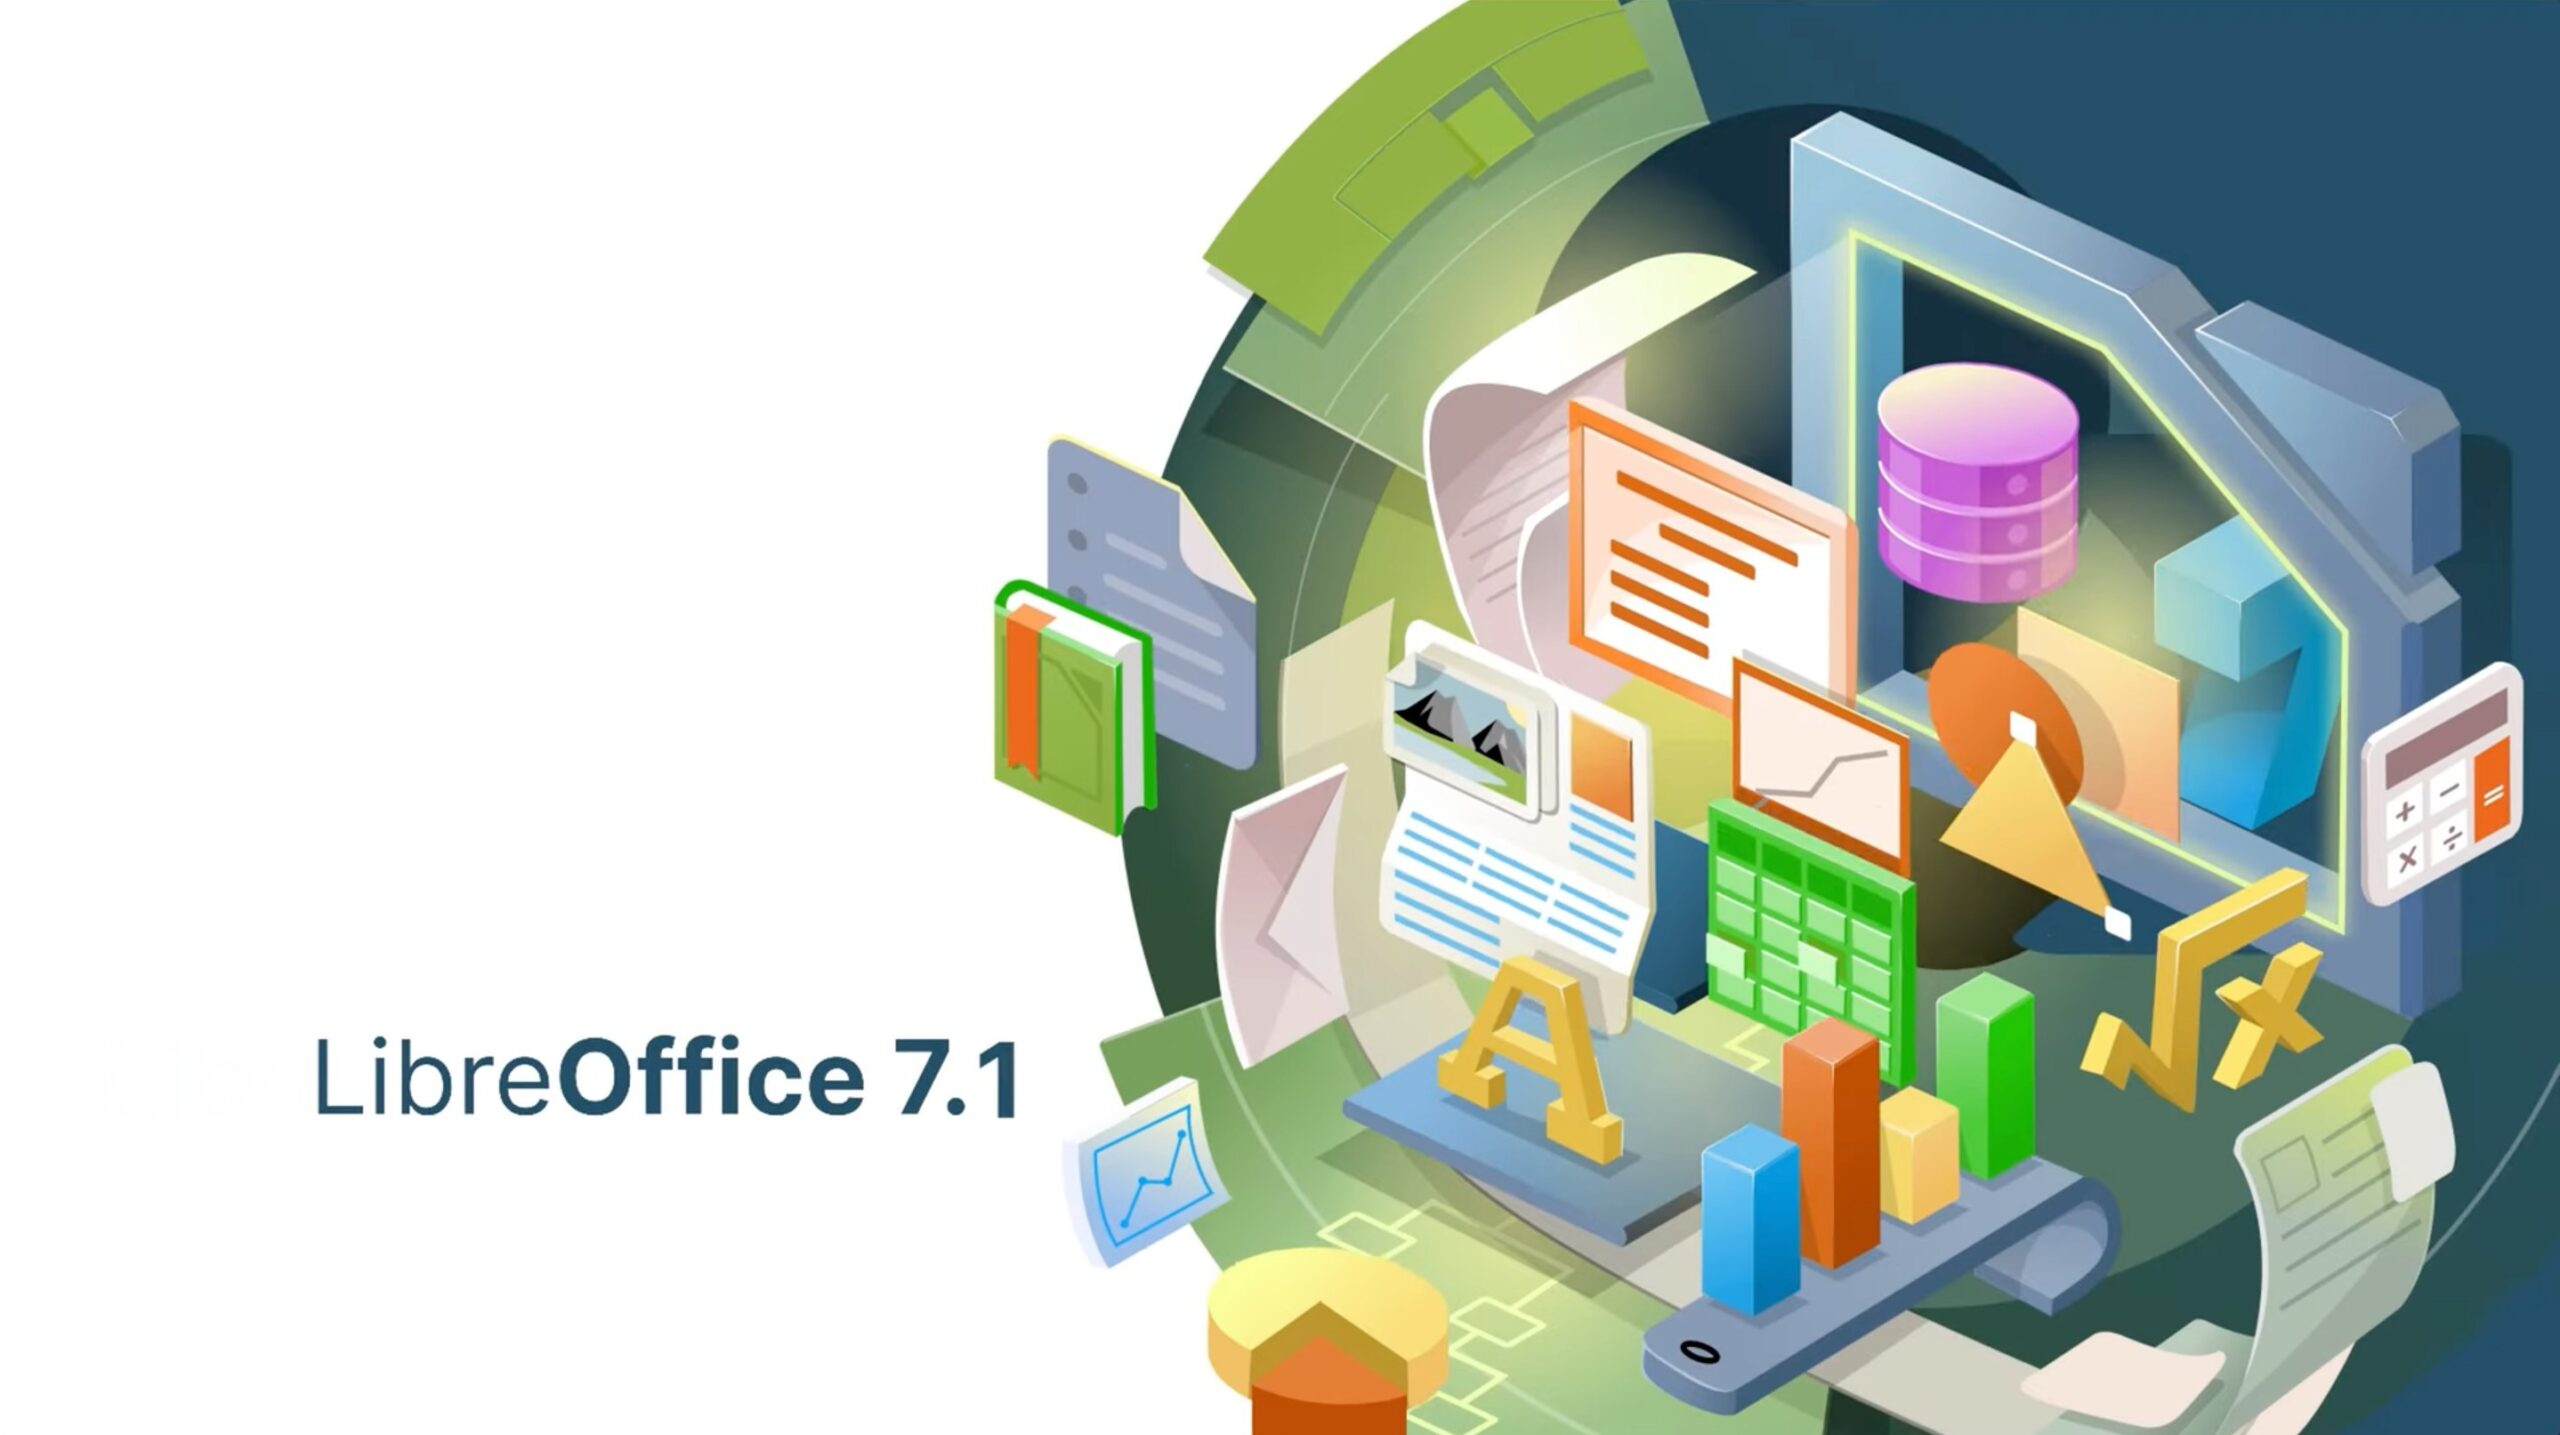 LibreOffice 7.1 Office Suite Gets First Point Release, over 90 Bugs Were Fixed